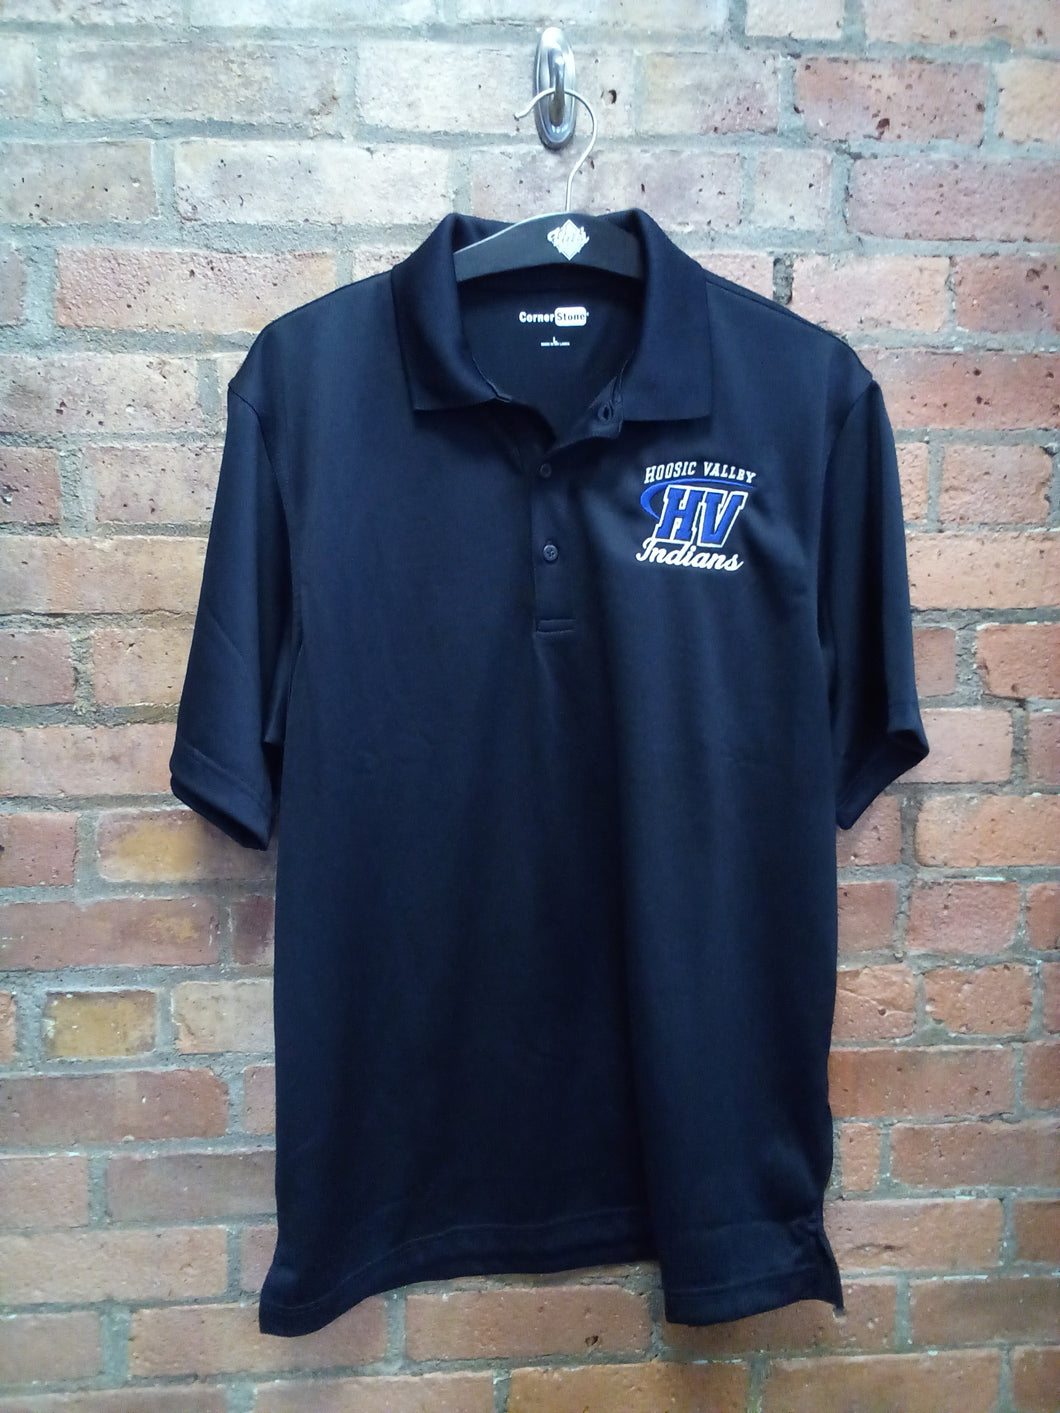 CLEARANCE - Hoosic Valley Indians Black Polo Shirt